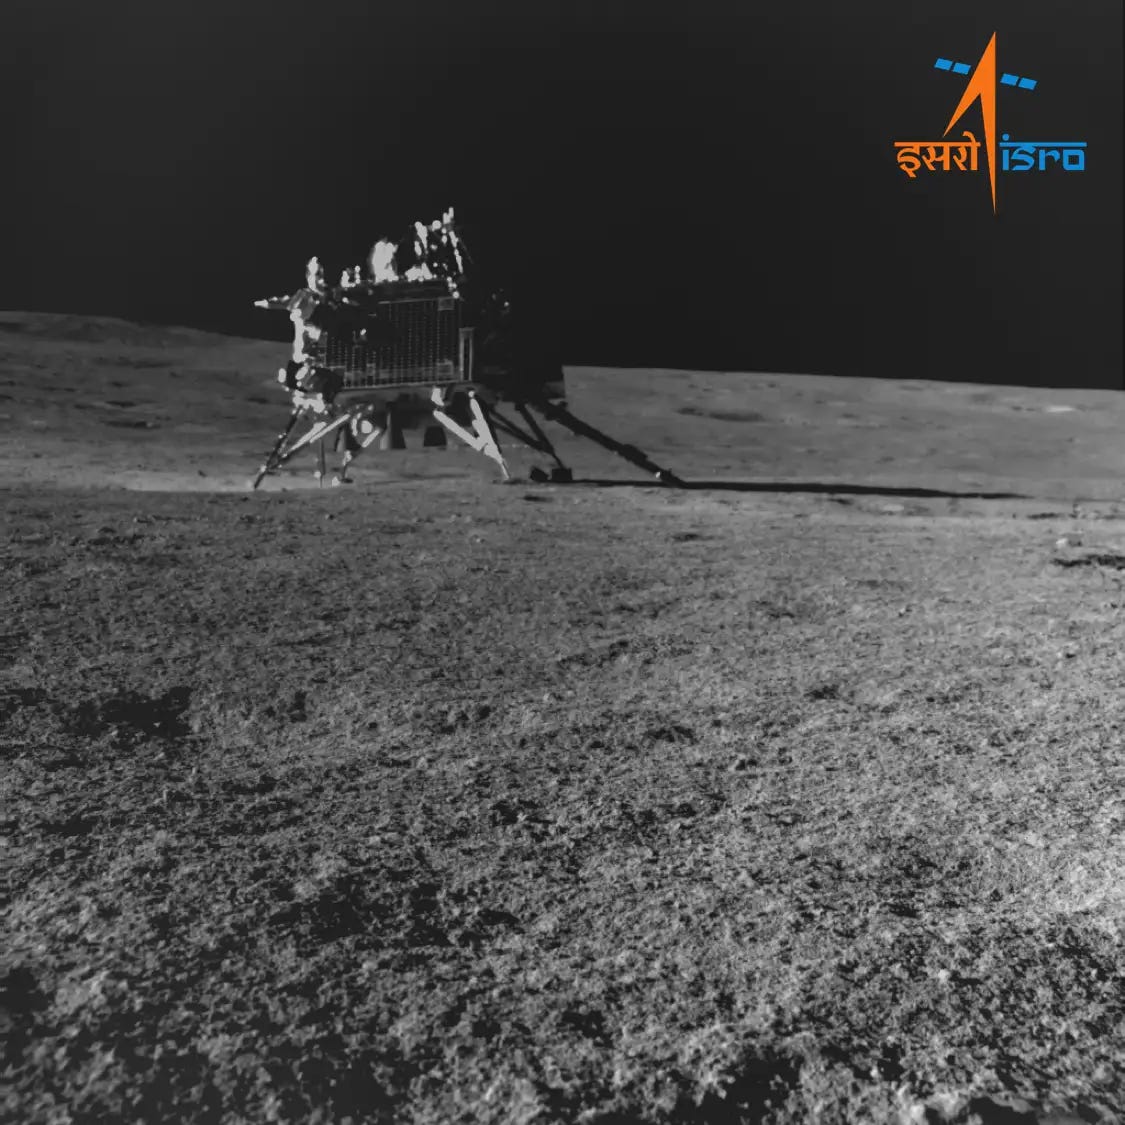 A black-and-white image of a squat lunar lander sitting on the surface of the Moon